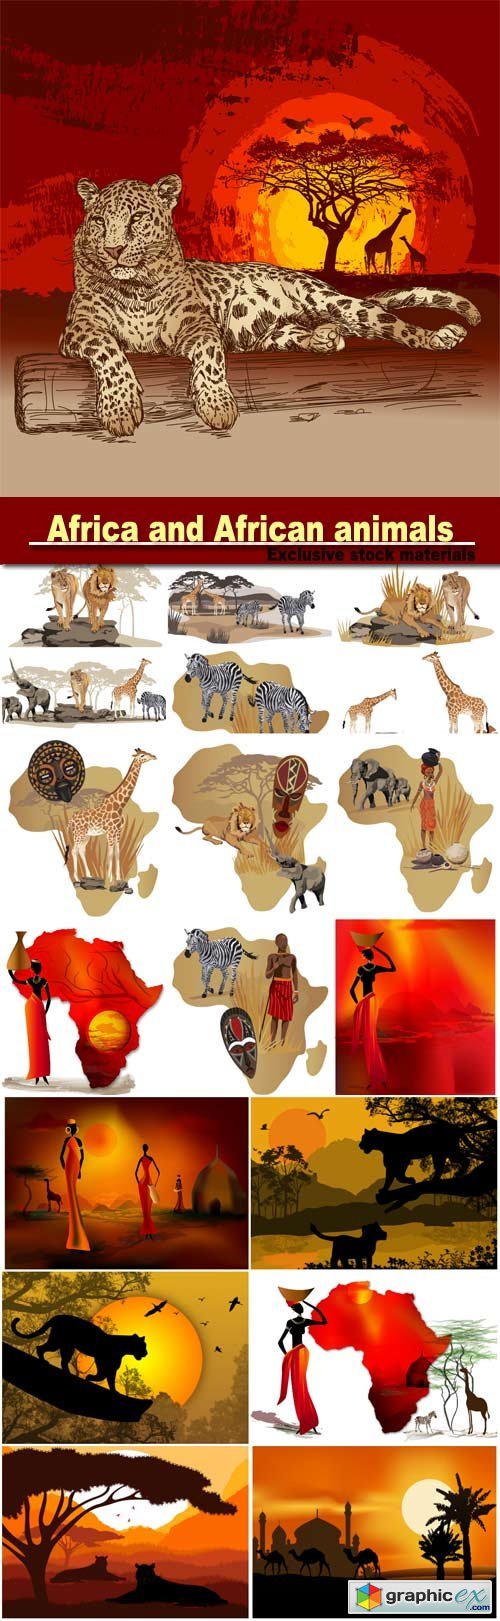 Africa and African animals vector